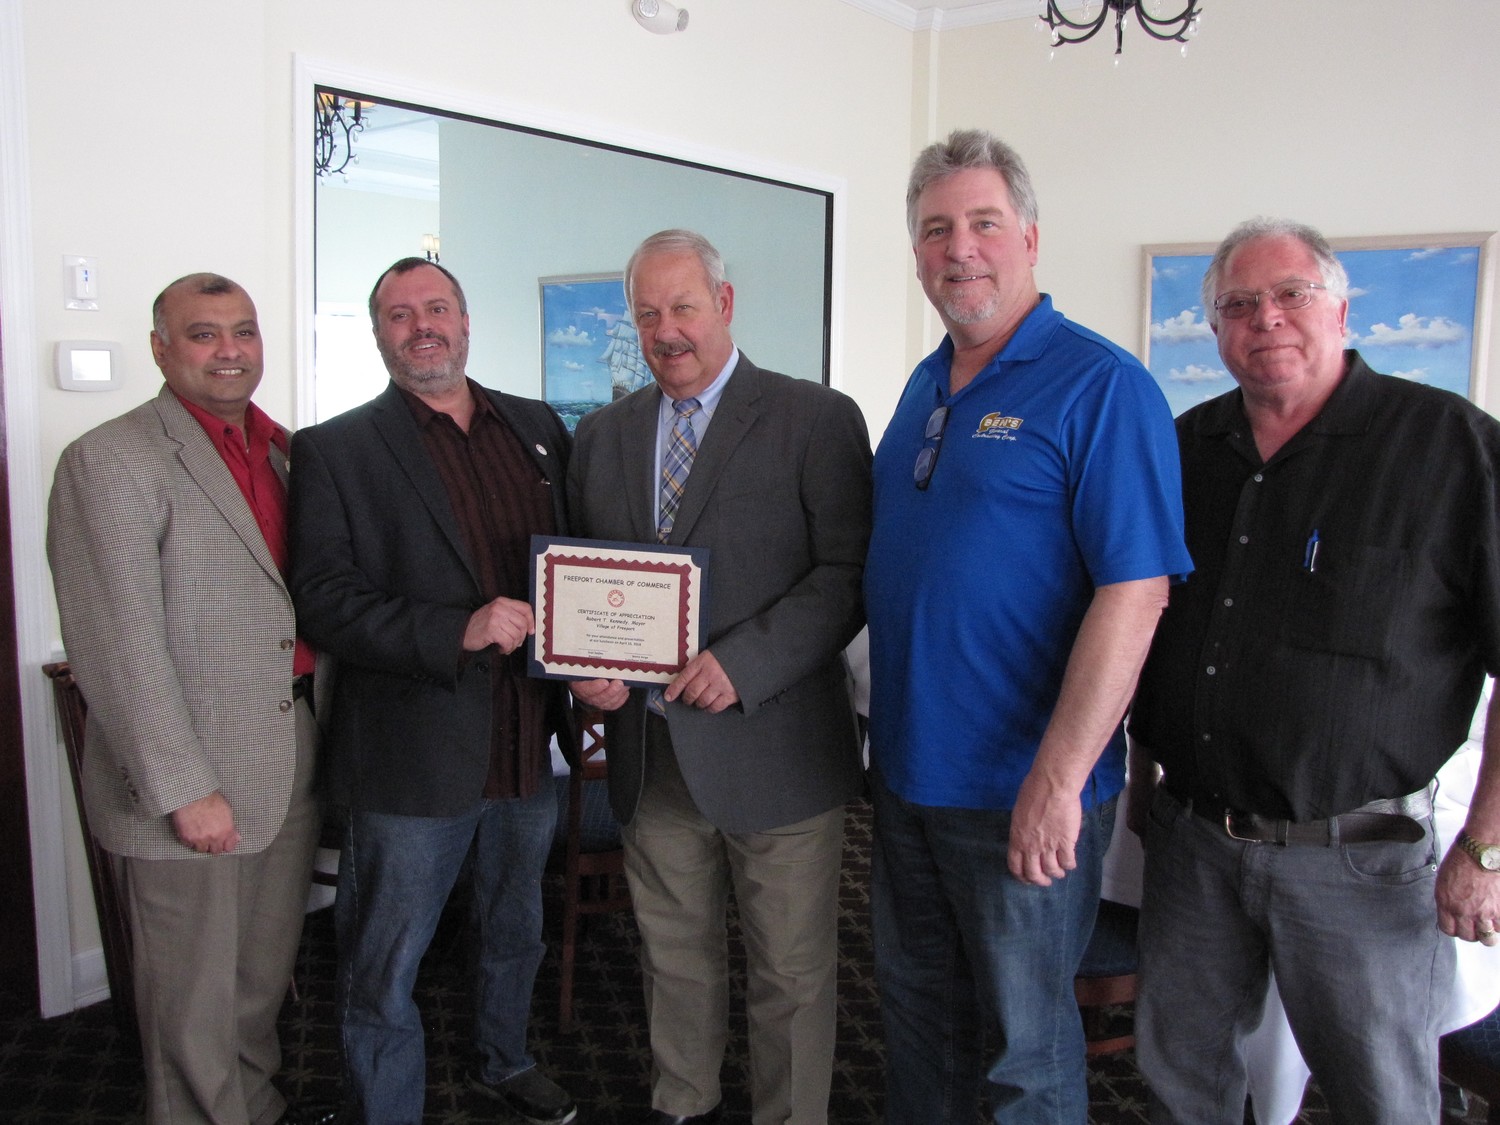 Freeport Mayor Robert Kennedy, center, received a citation from Chamber of Commerce members, from left, Ken Dookram, President Ivan Sayles, Ben Jackson and Thomas Dipolito at a luncheon on the Nautical Mile on Tuesday.